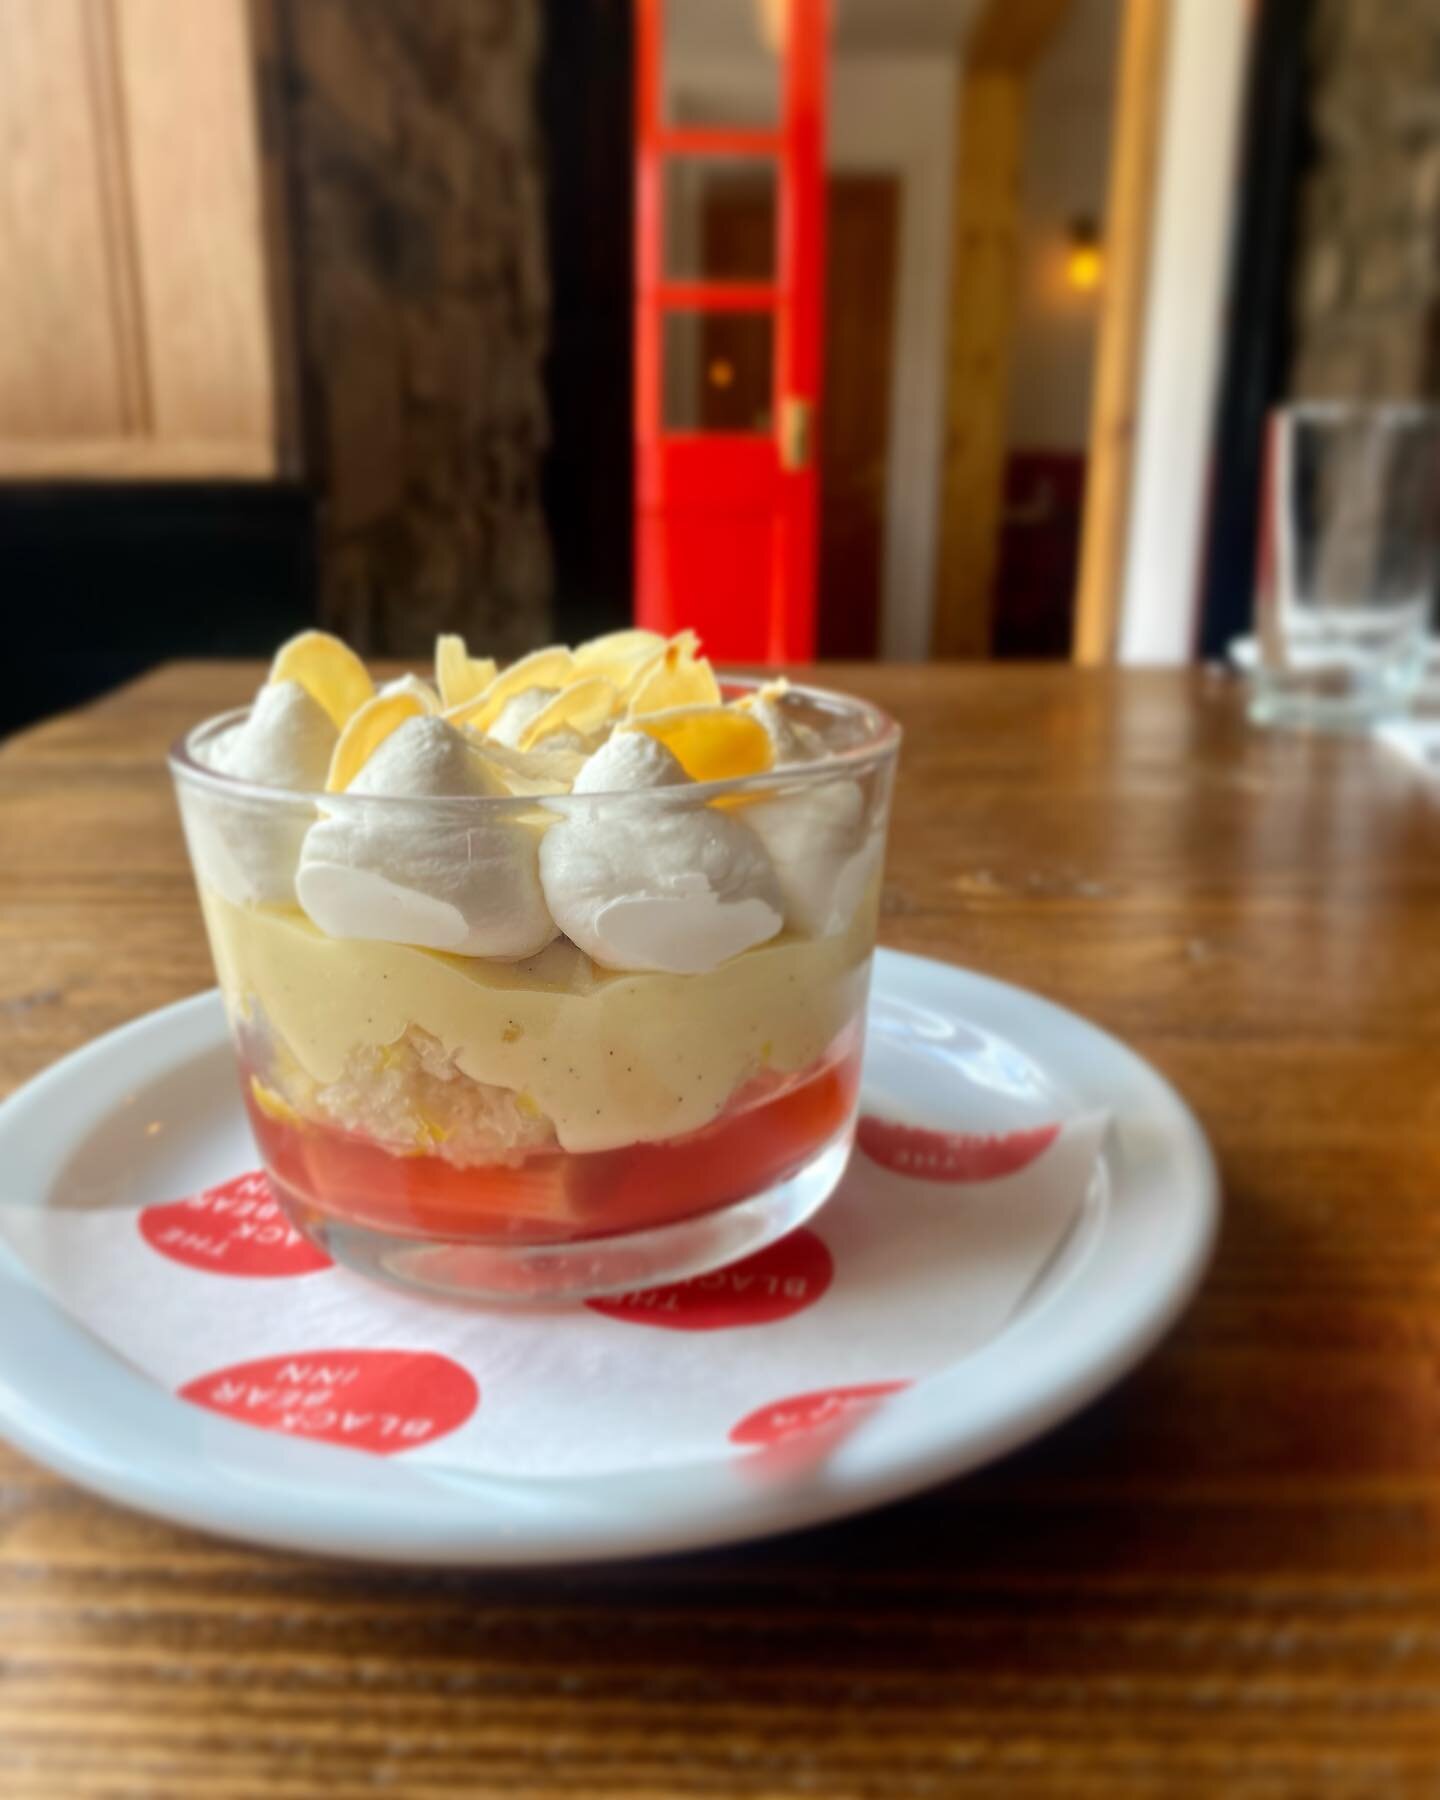 A classic for a reason; Rhubarb Trifle 😎 On e of our desserts this week. Come and try it for yourself, we&rsquo;ve got tables available mid week and Friday lunchtime. You know it makes sense 🥂